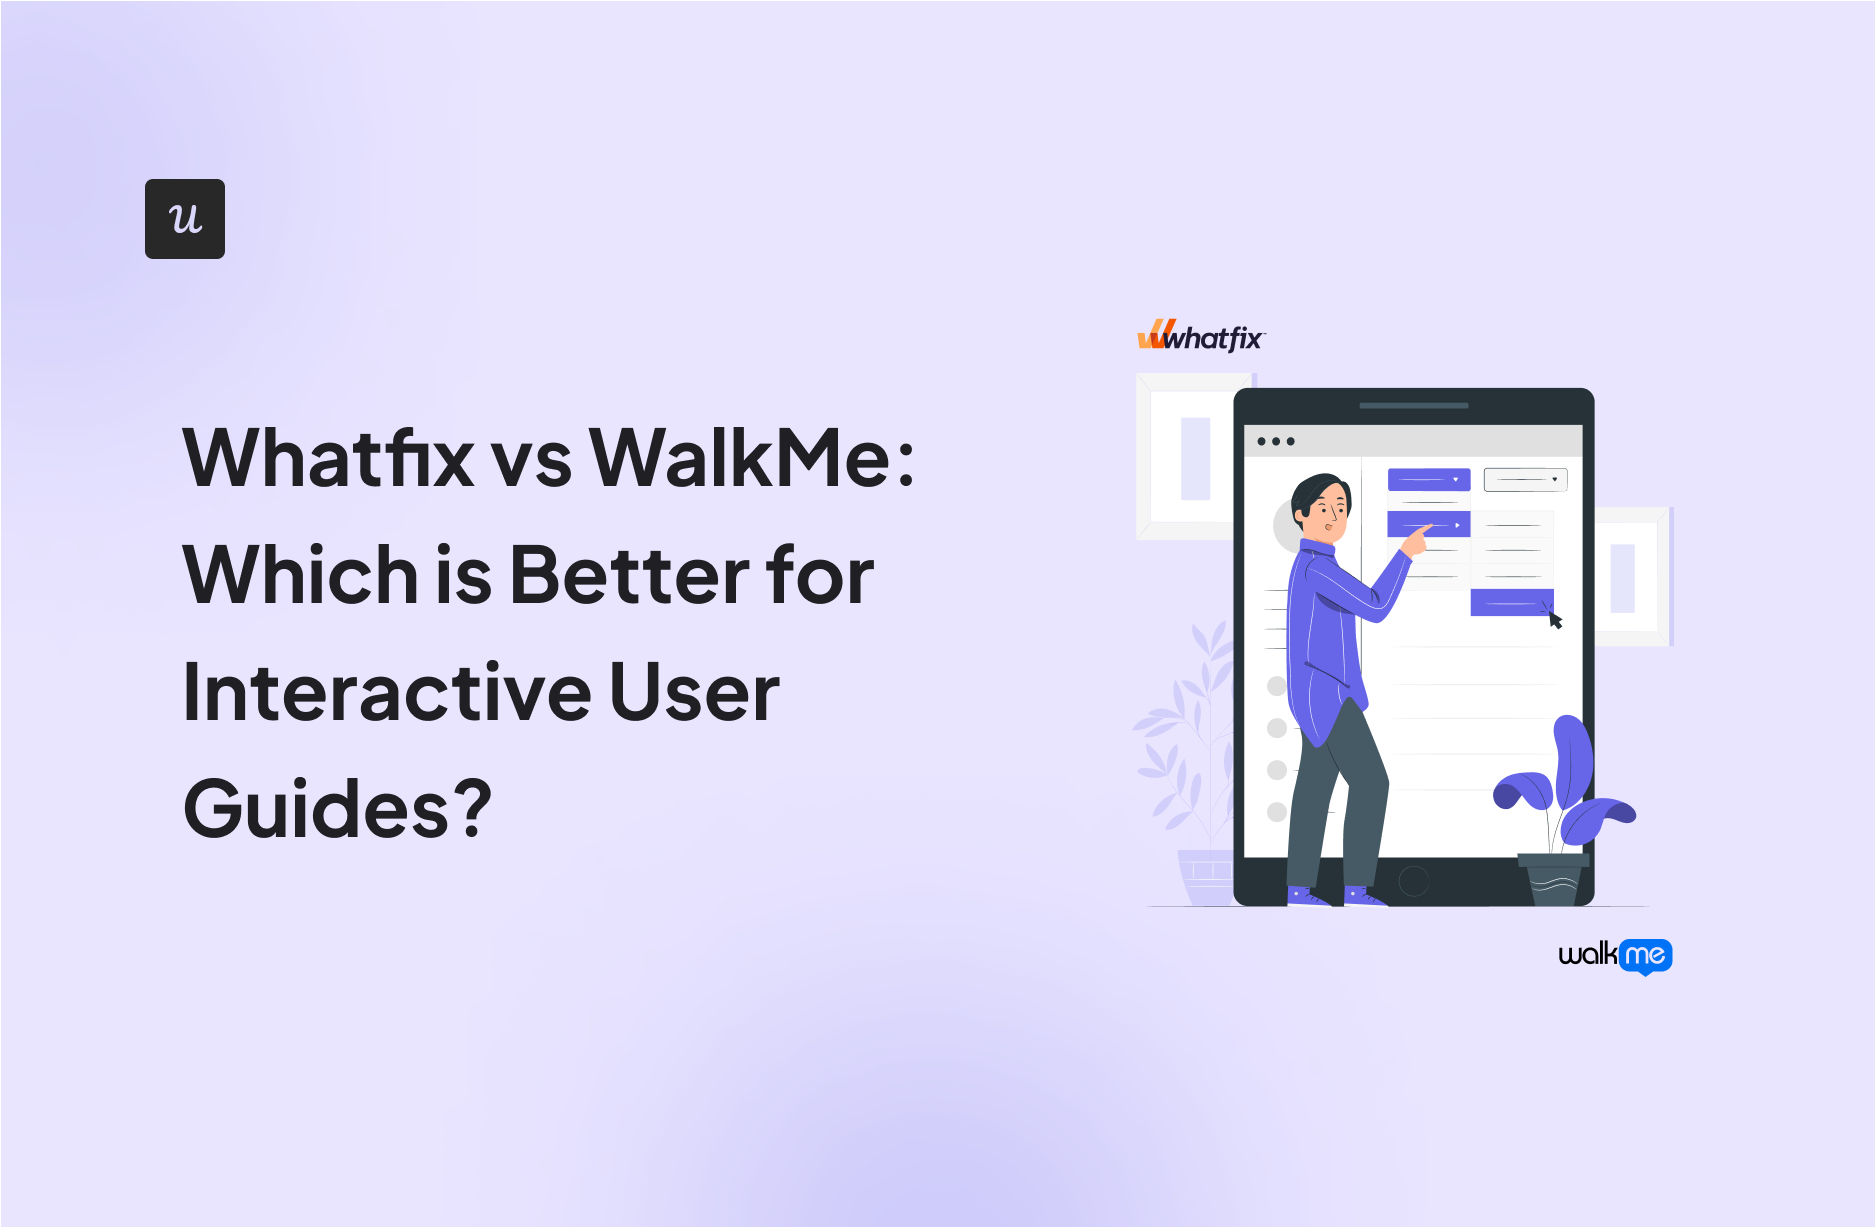 Whatfix vs WalkMe: Which is Better for Interactive User Guides?